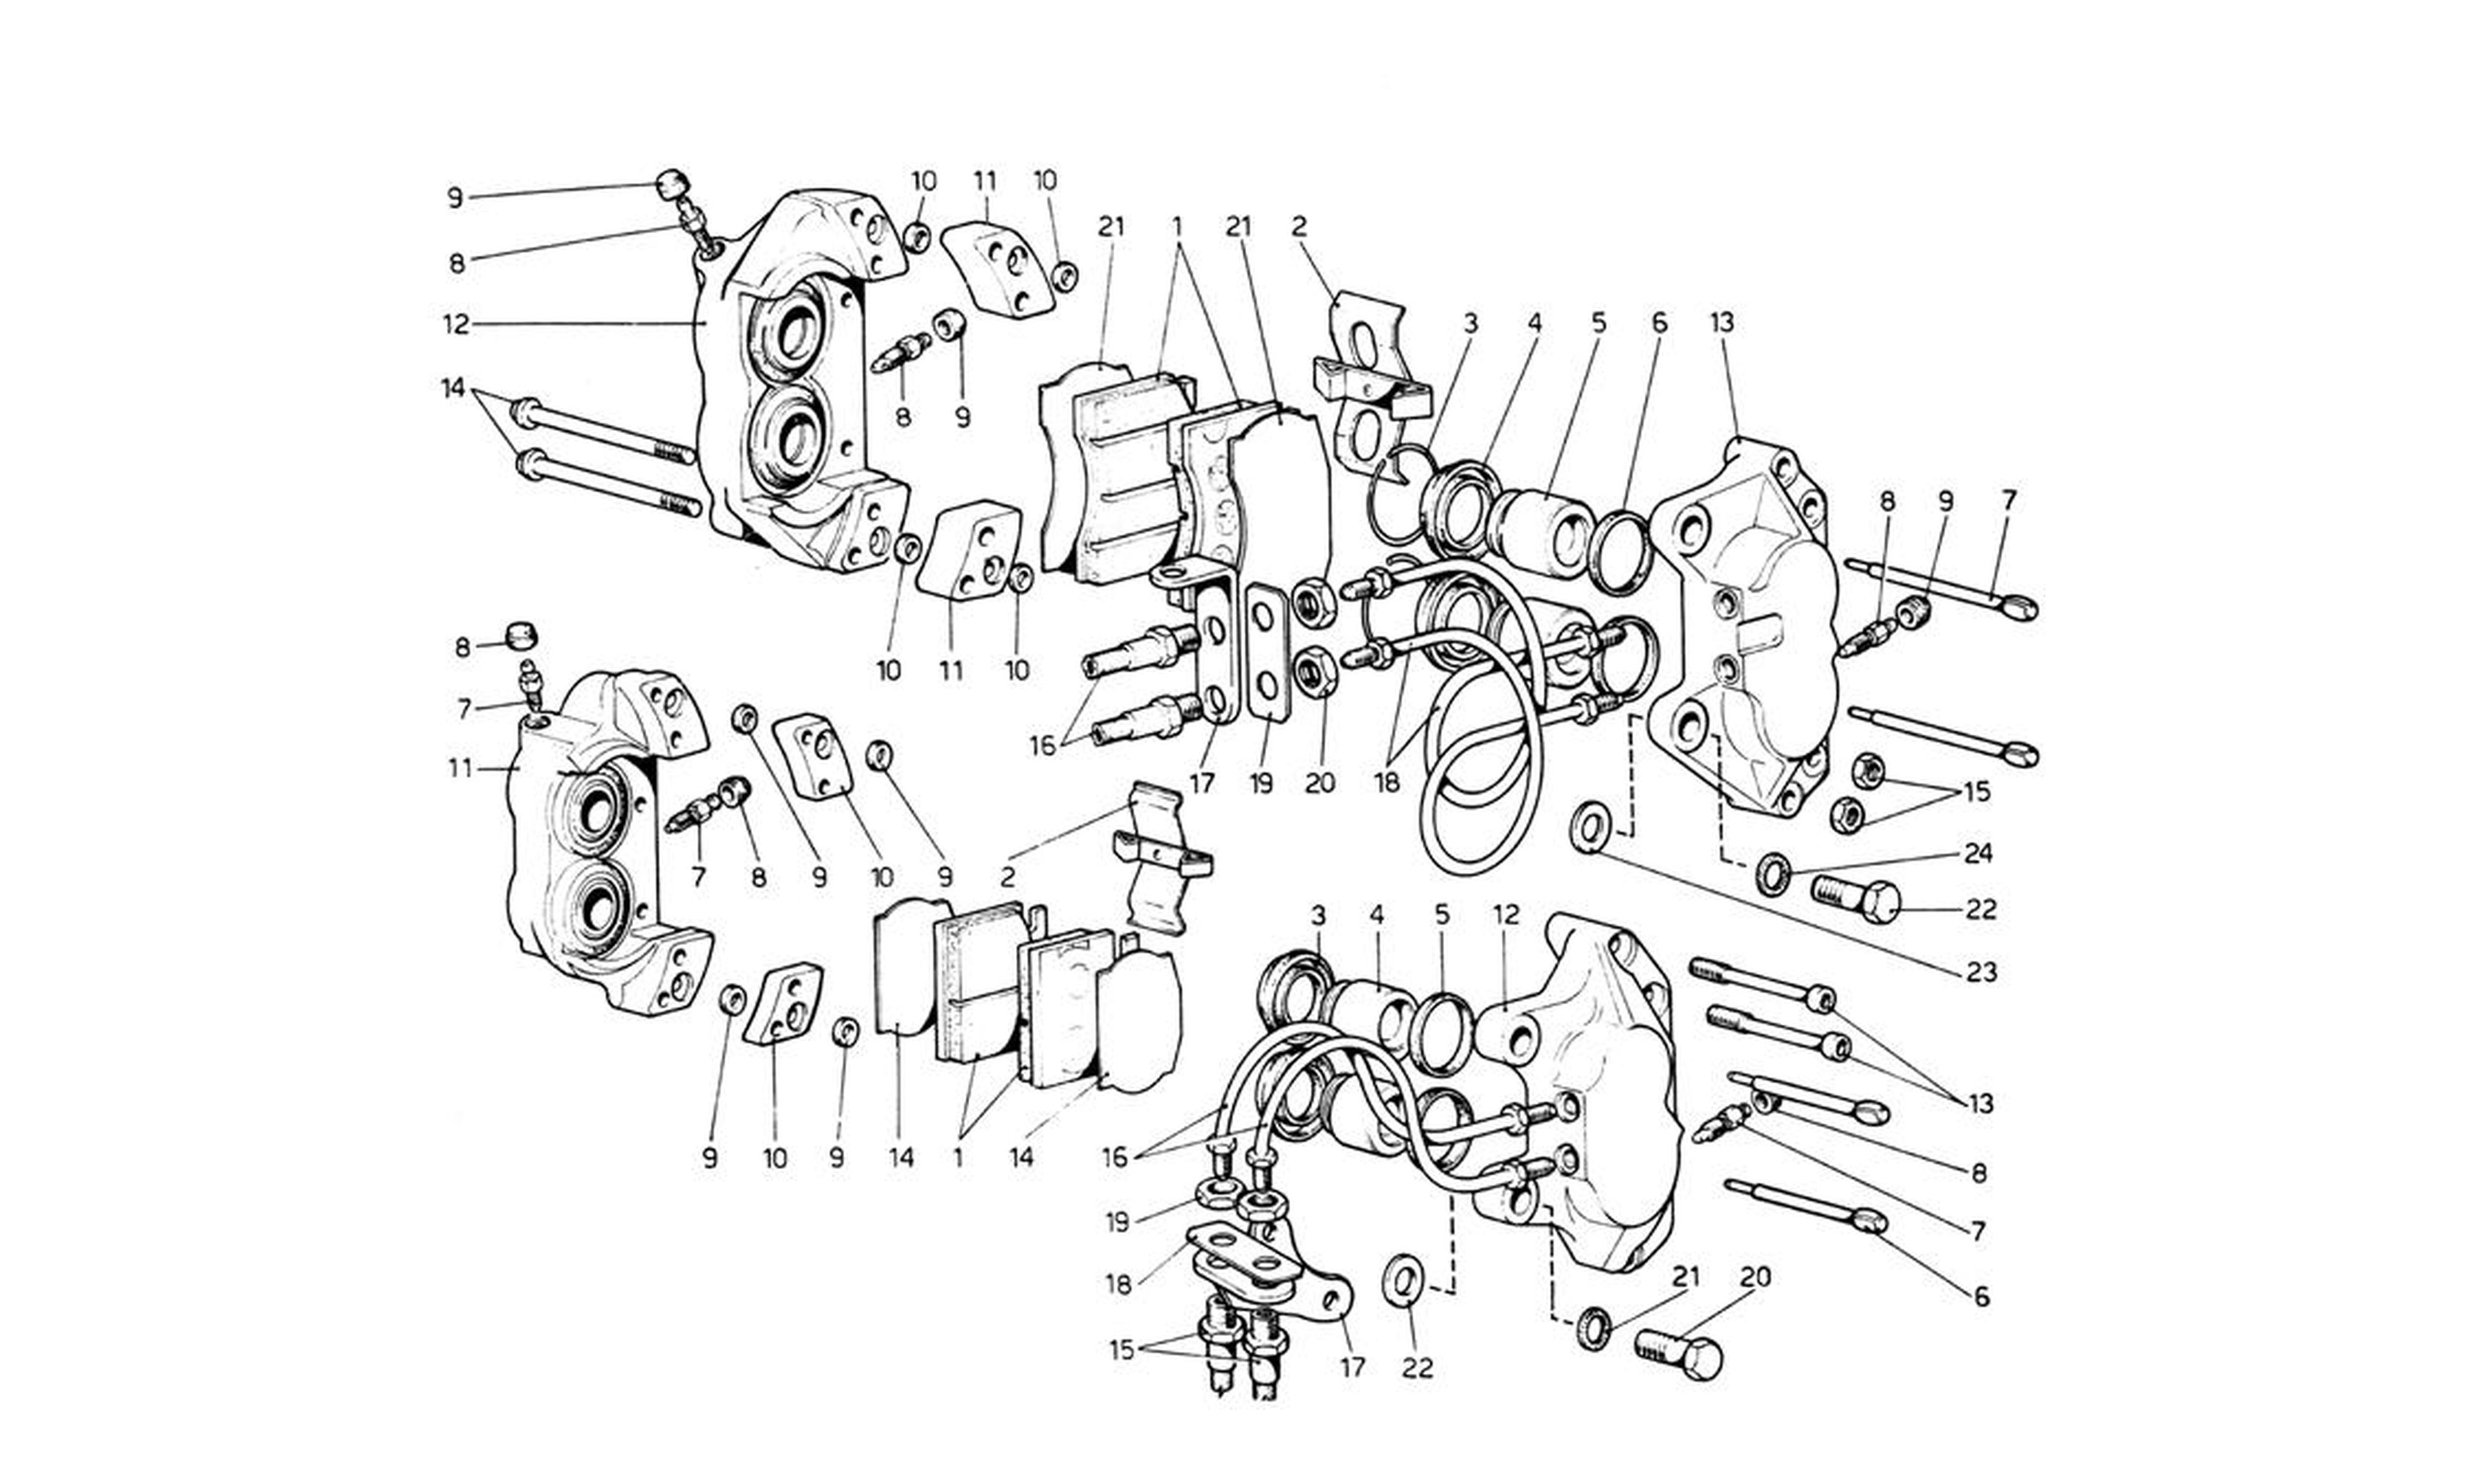 Schematic: Brake Calipers For Front And Rear